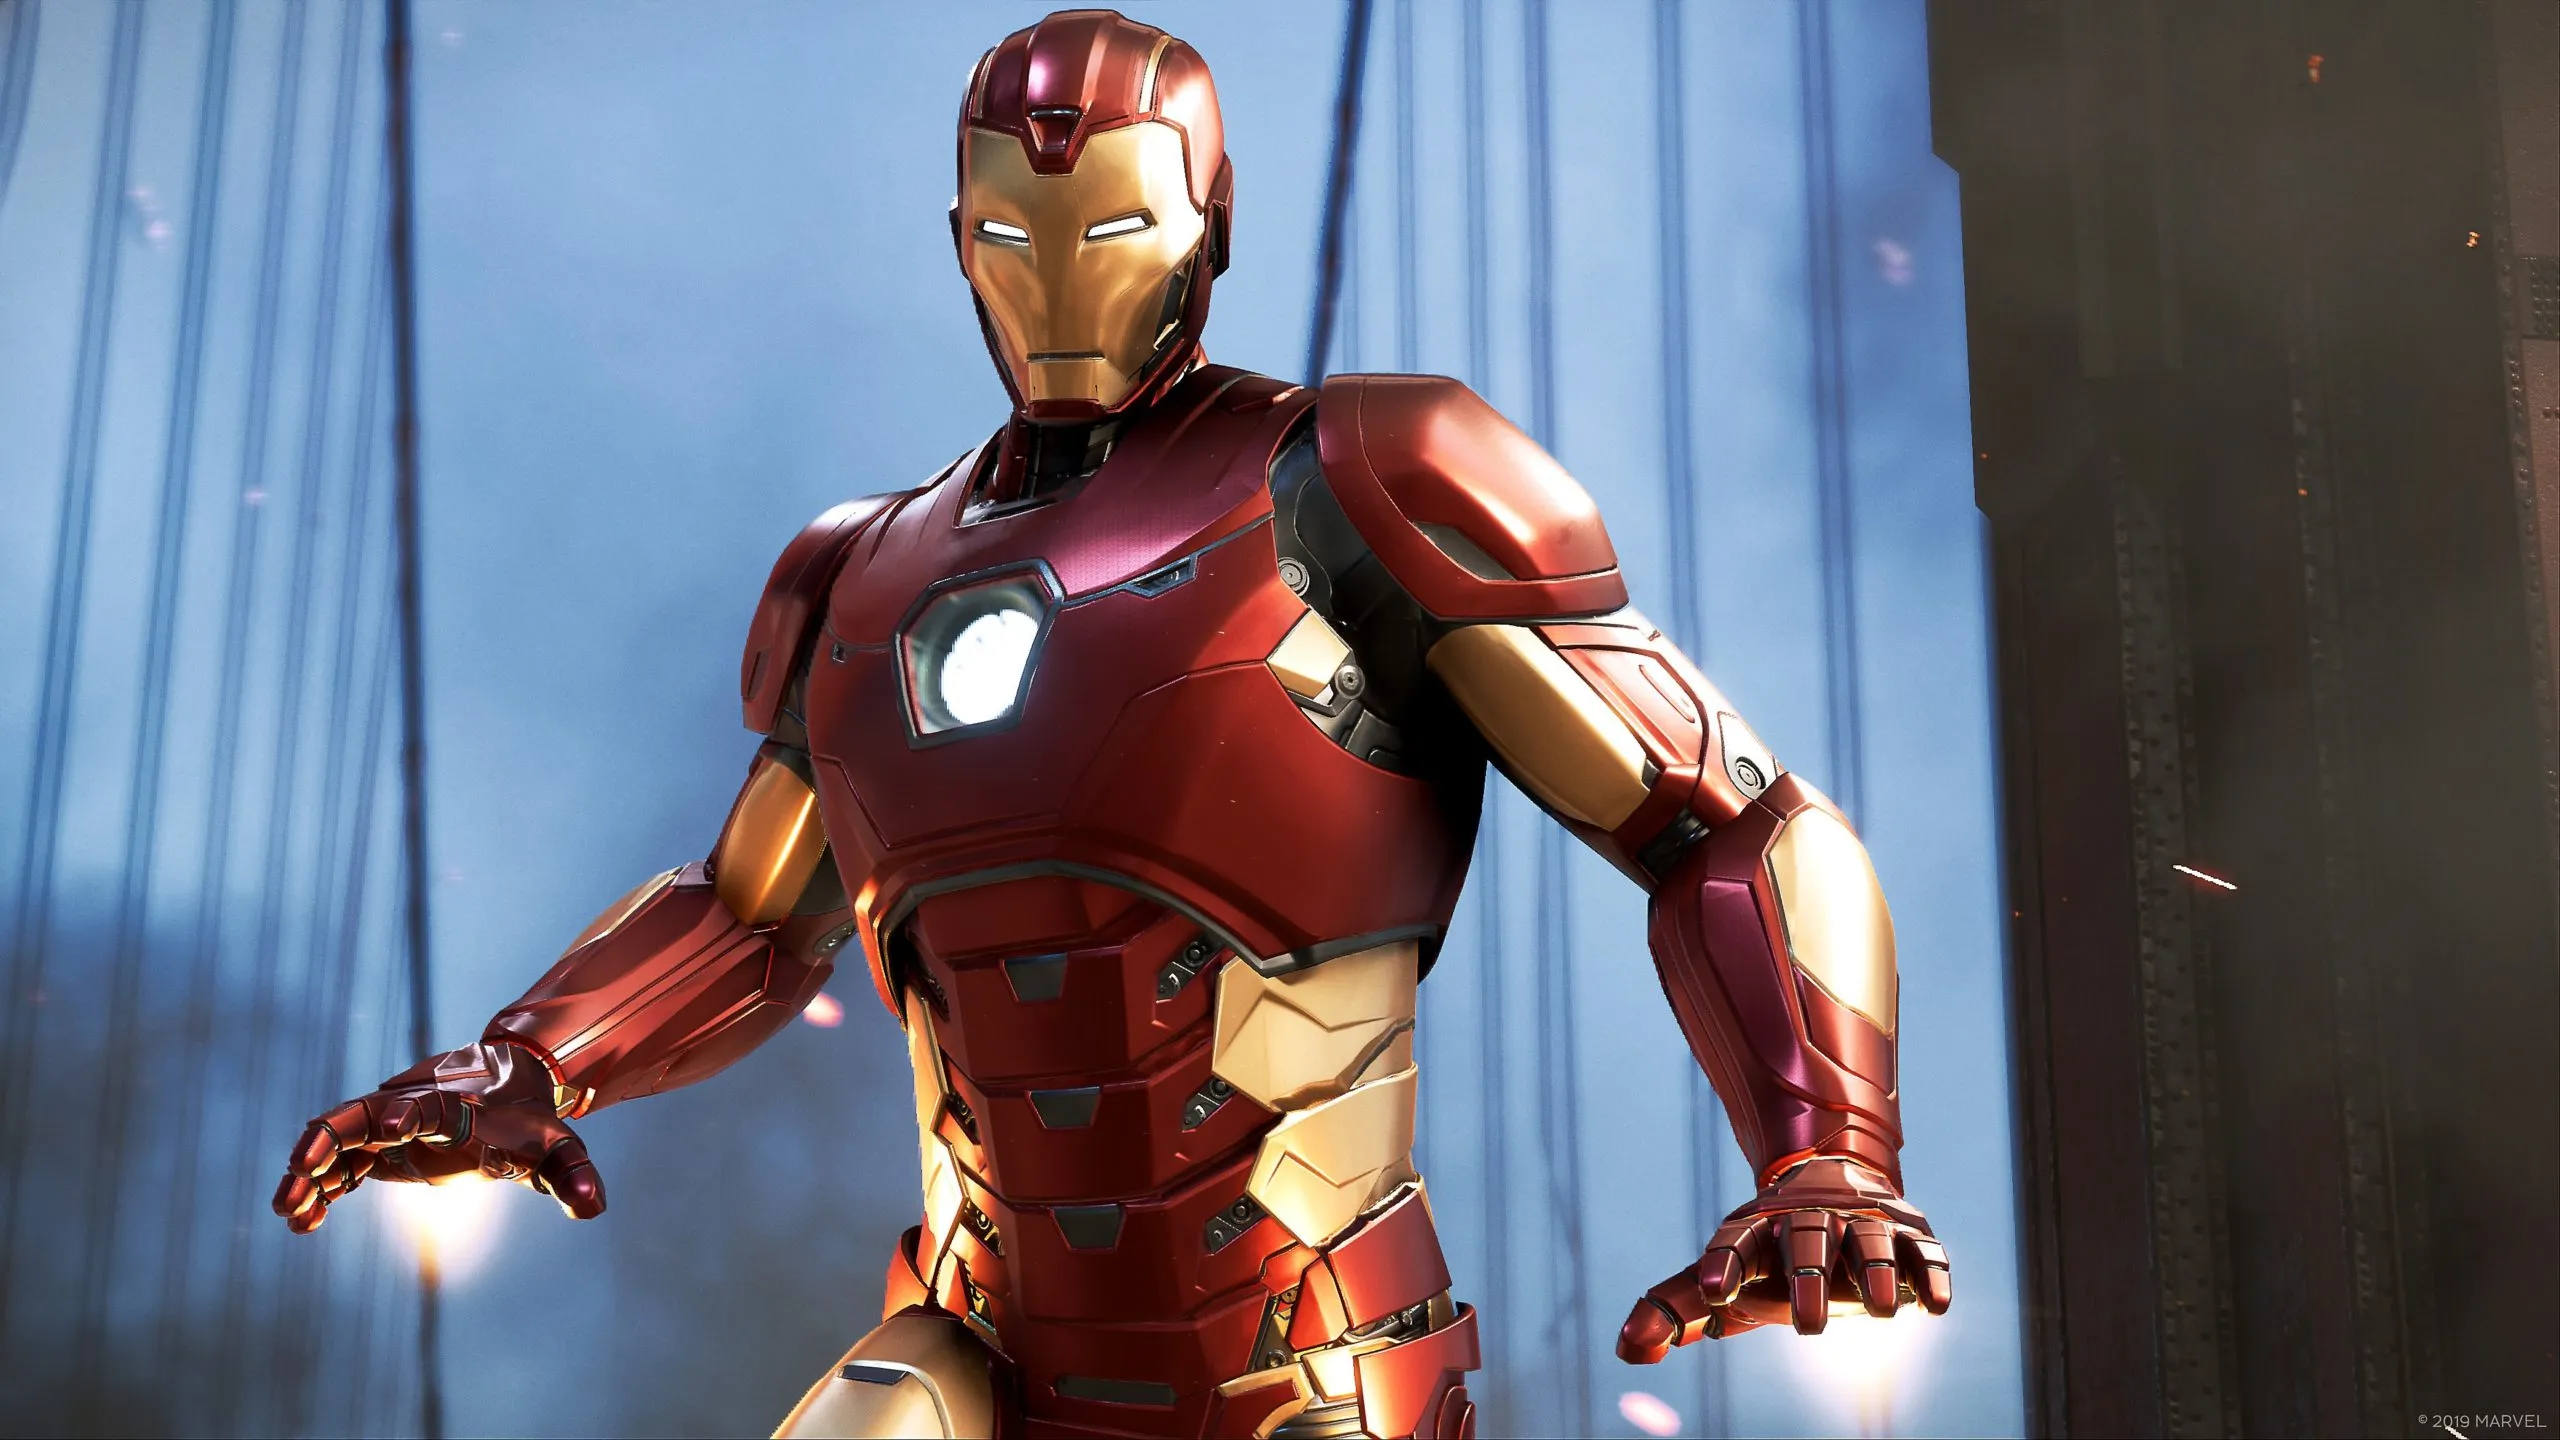 Marvel's Avengers: How to destroy walls as Iron Man?